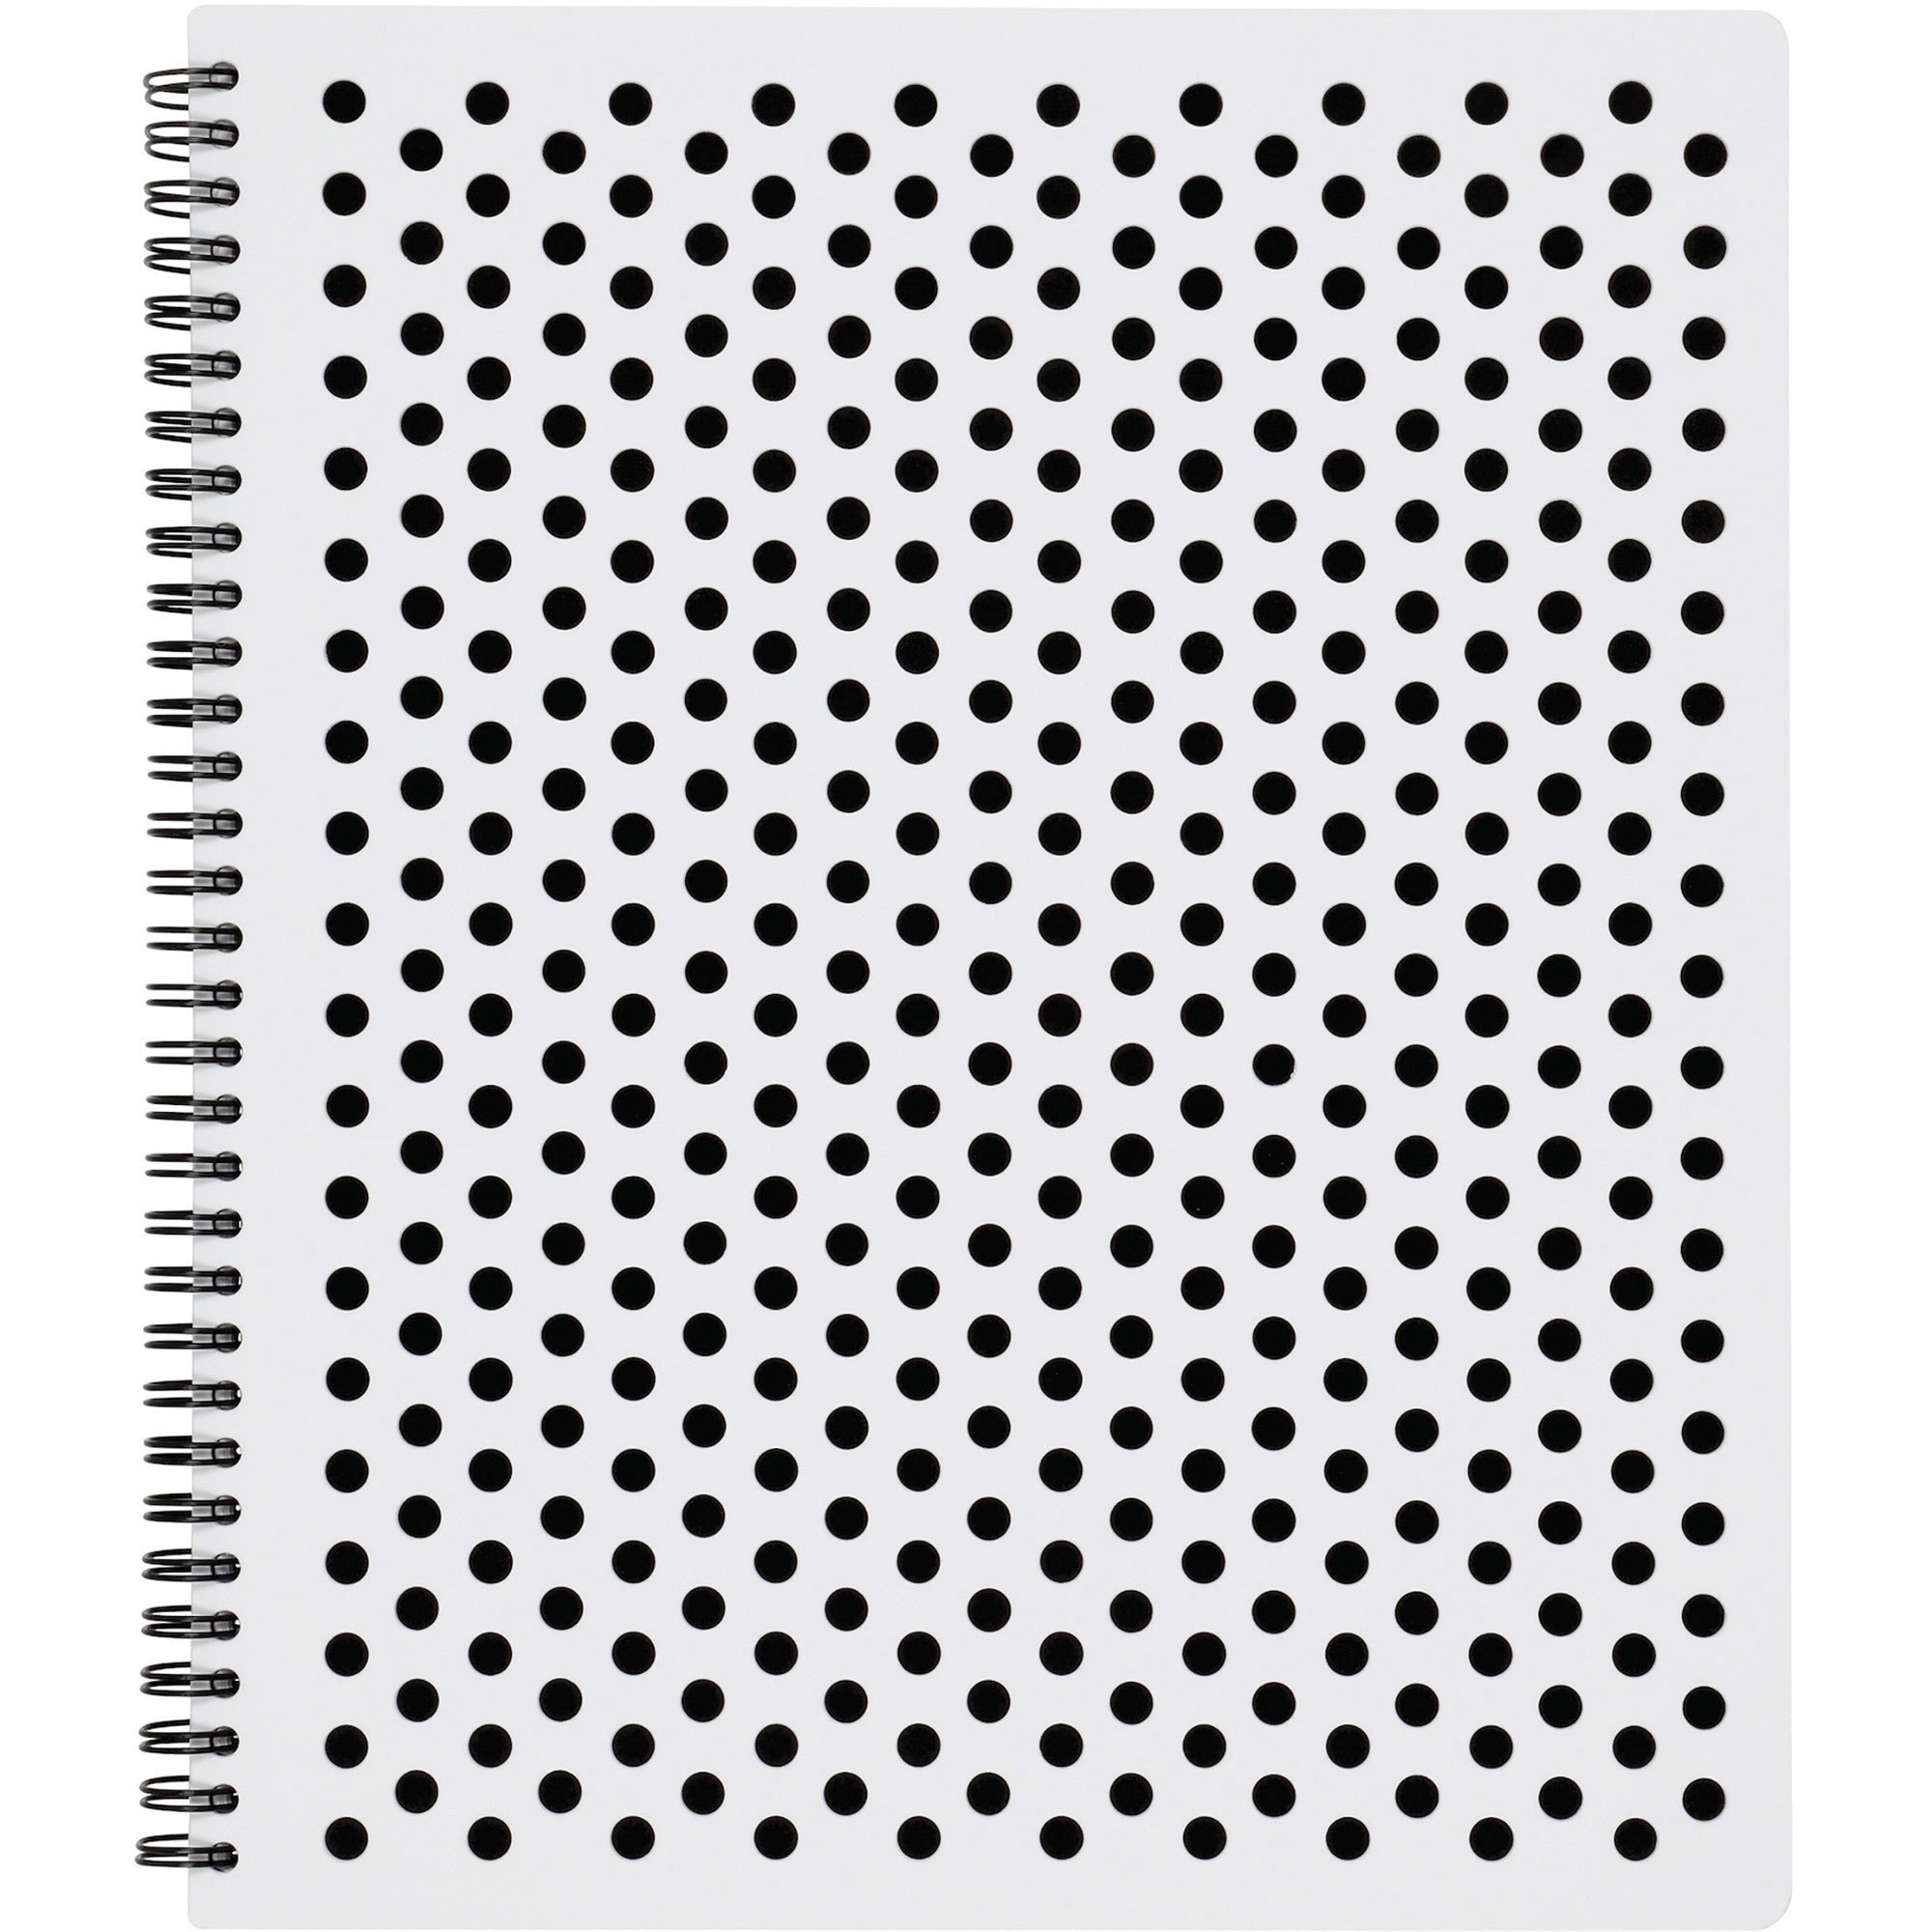 tops-polka-dot-design-spiral-notebook-double-wire-spiral-college-ruled-3-holes-11-x-9-black-polka-dot-cover-micro-perforated-hole-punched-durable-wear-resistant-damage-resistant-1-each_top69734 - 1